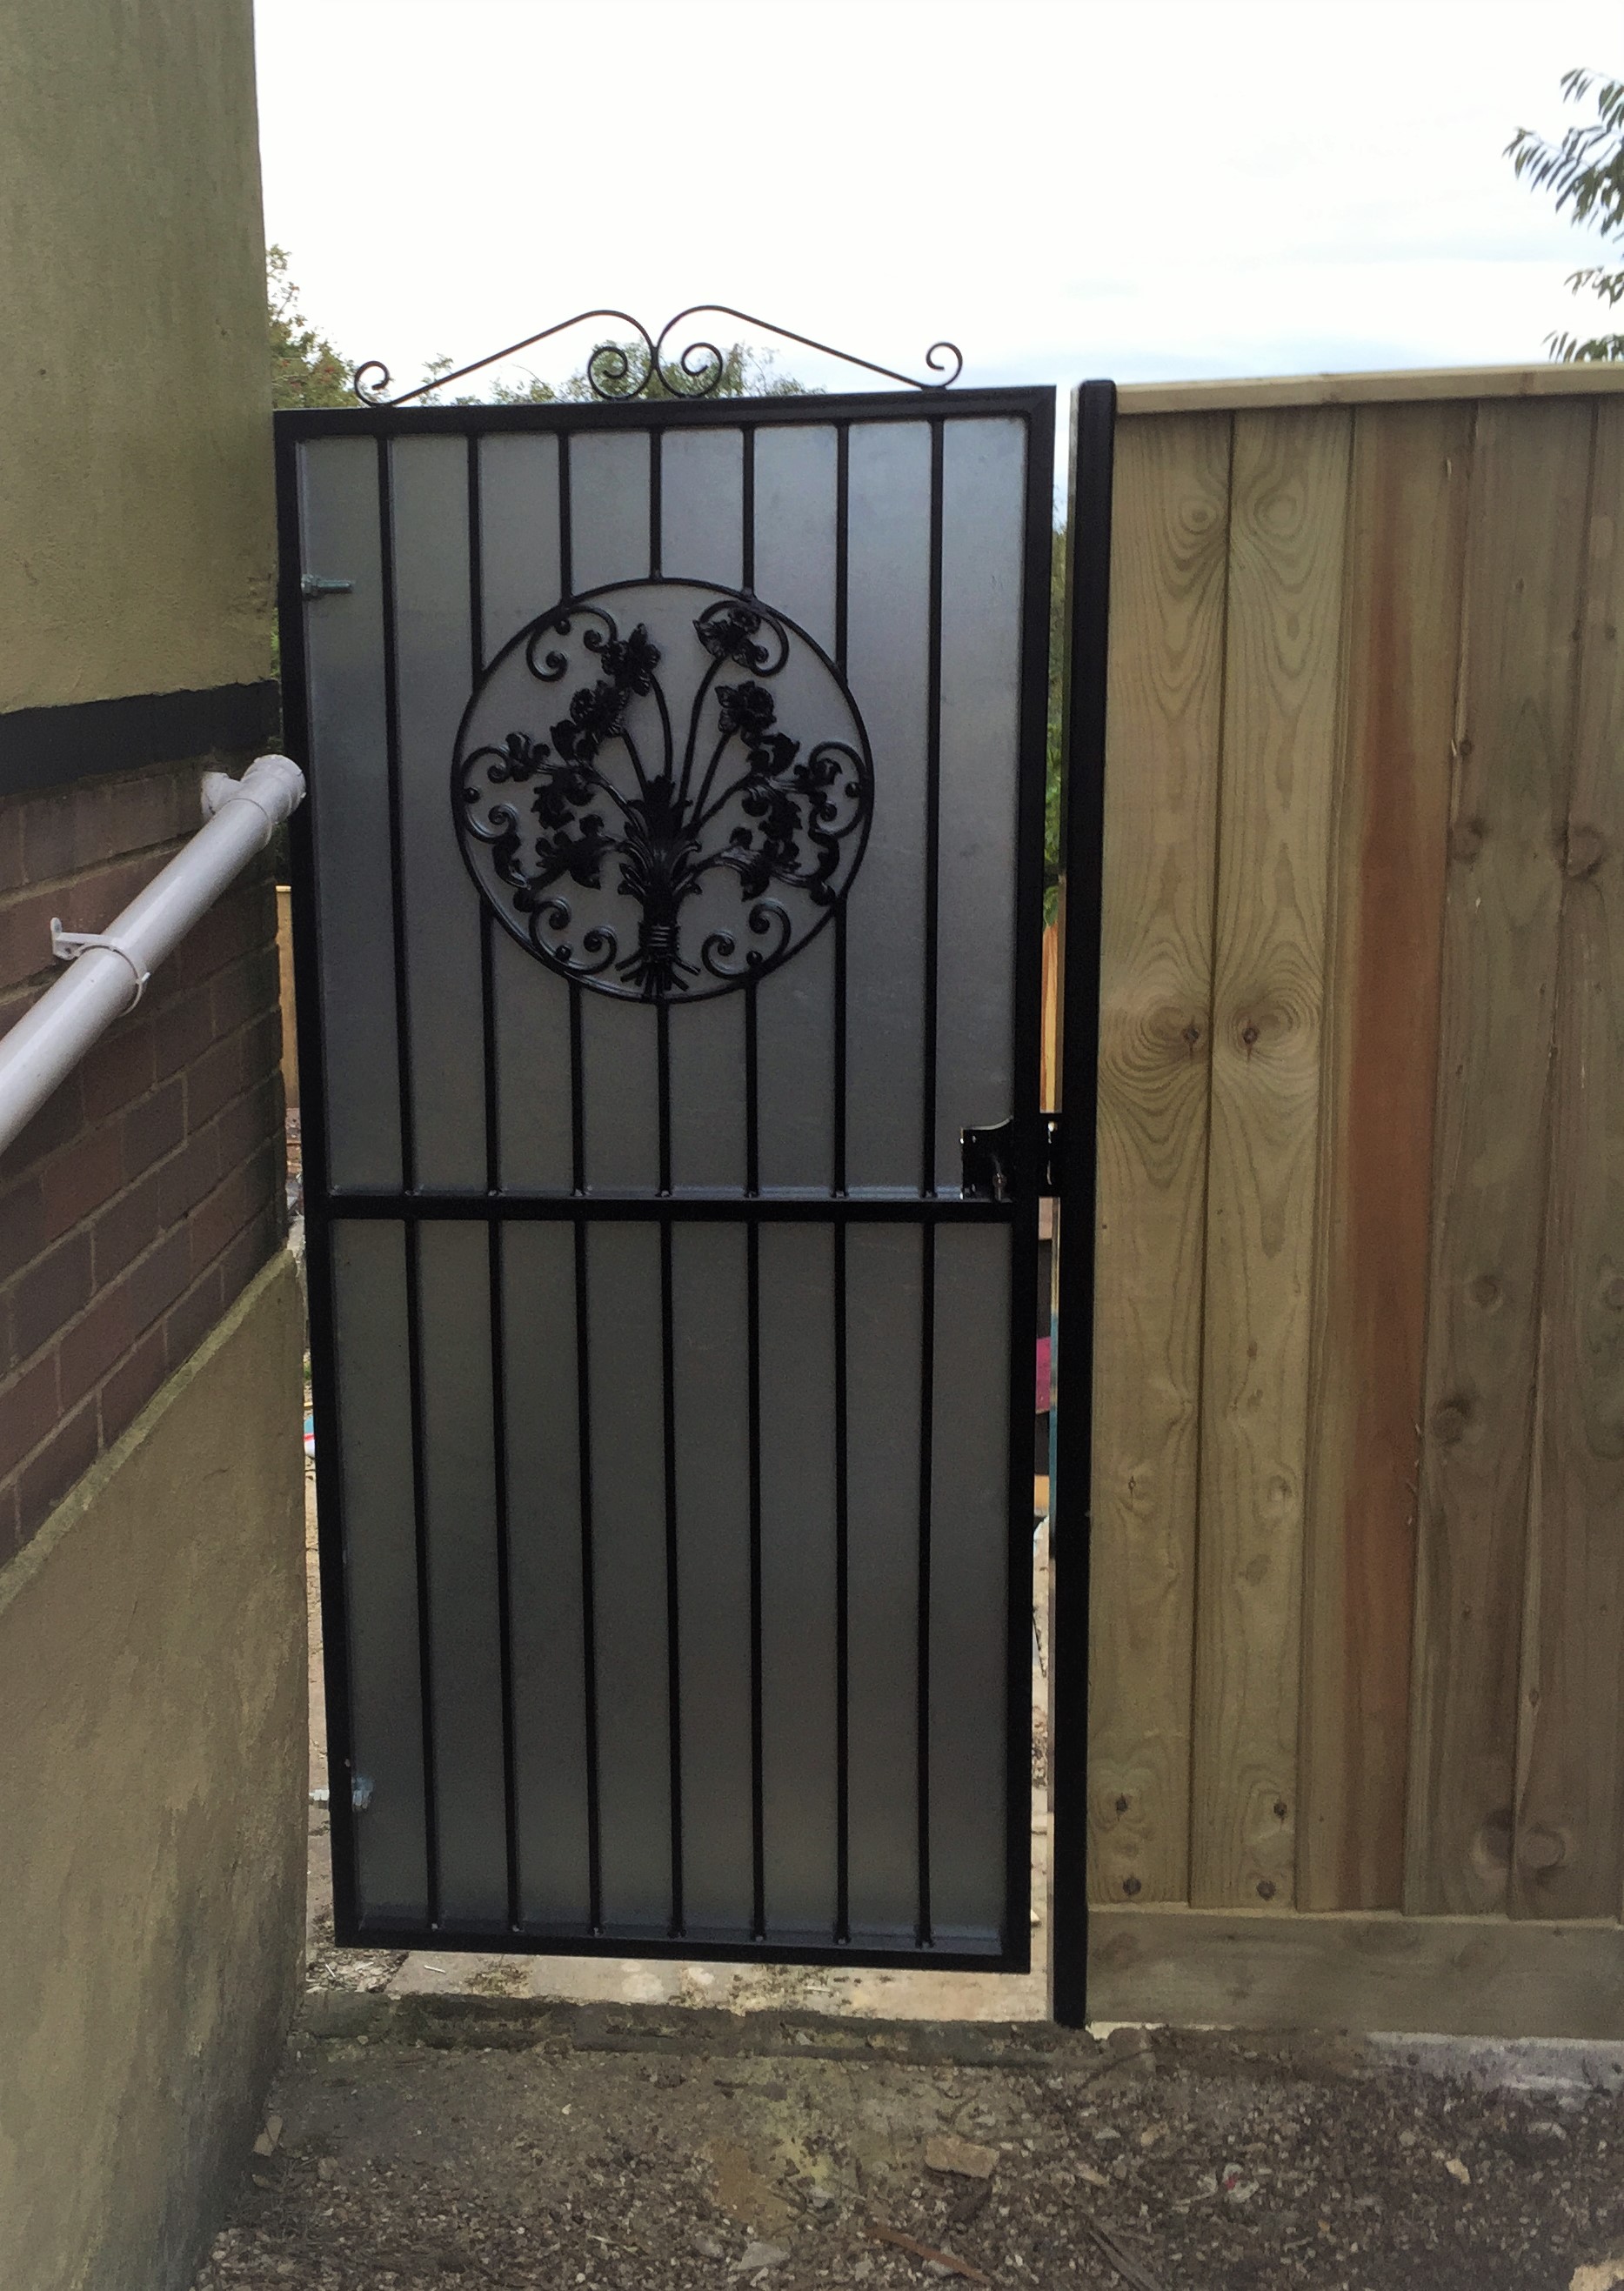 The same gate with a sheet background to block the view of the back garden